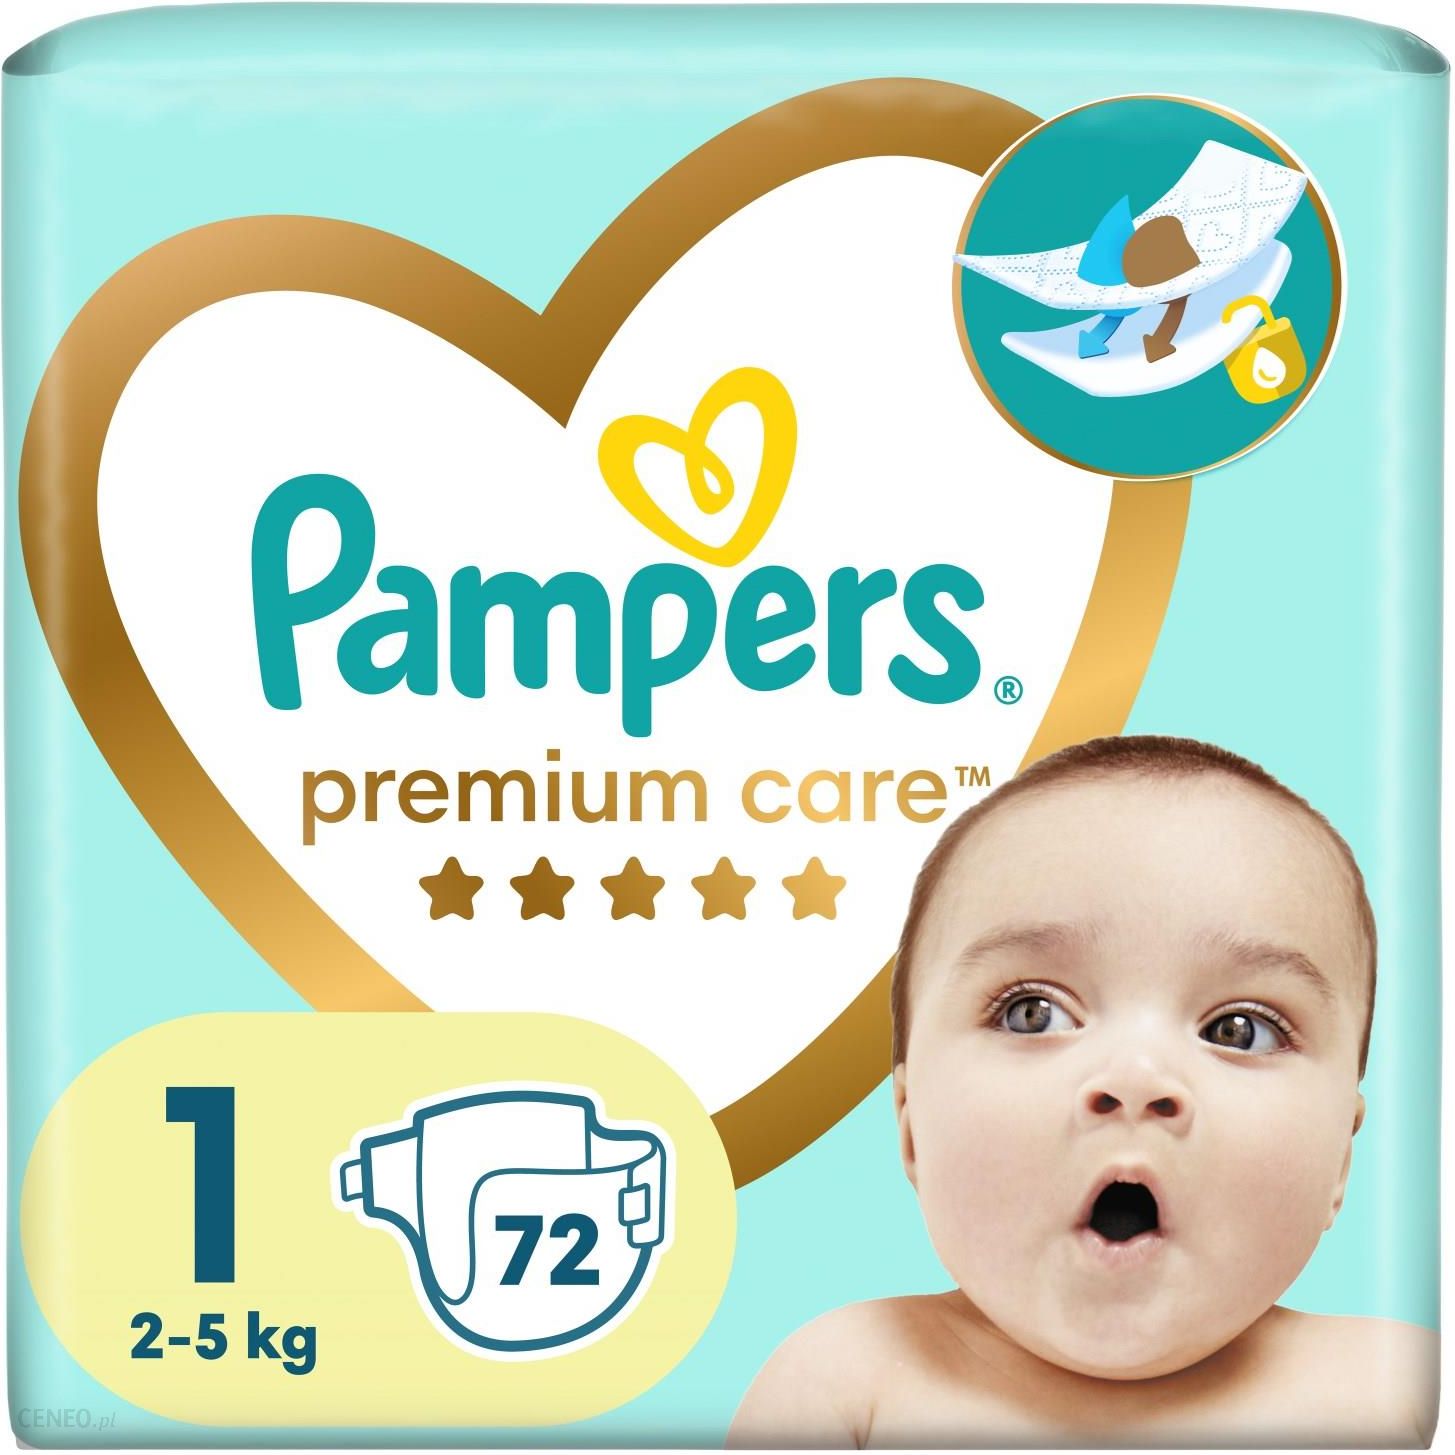 pampers pants 6 france